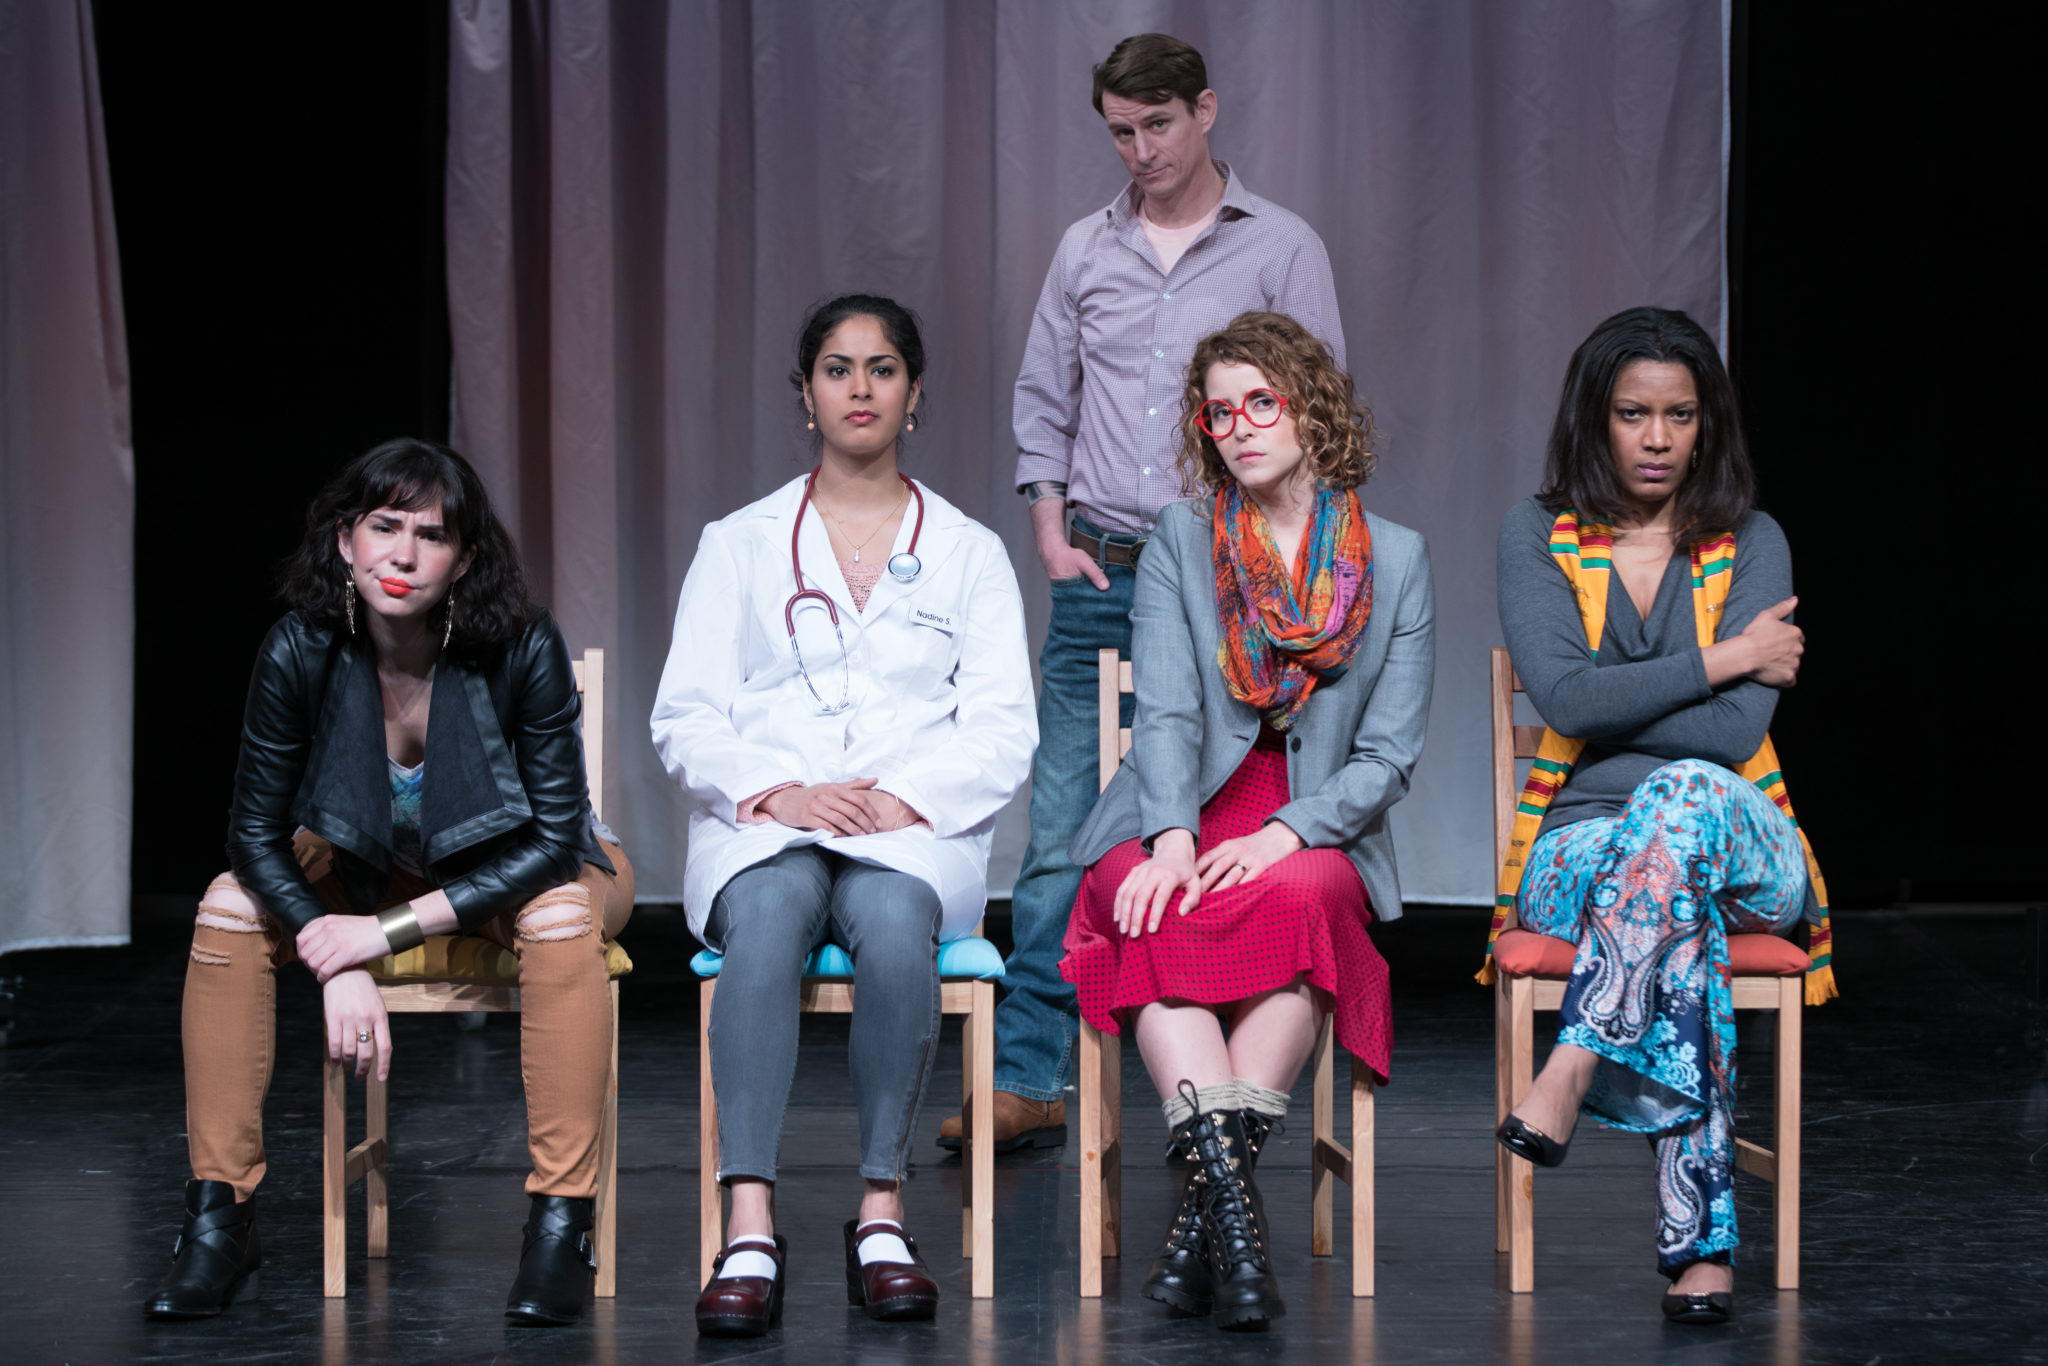 Evelyn Sphar, Shanta Parasuraman, Joshua Everett Johnson, Gisele Chípe and Tracey Conyer Lee perform real-life abortion stories in 'Remarkably Normal,' a nationally touring play about abortion stigma.